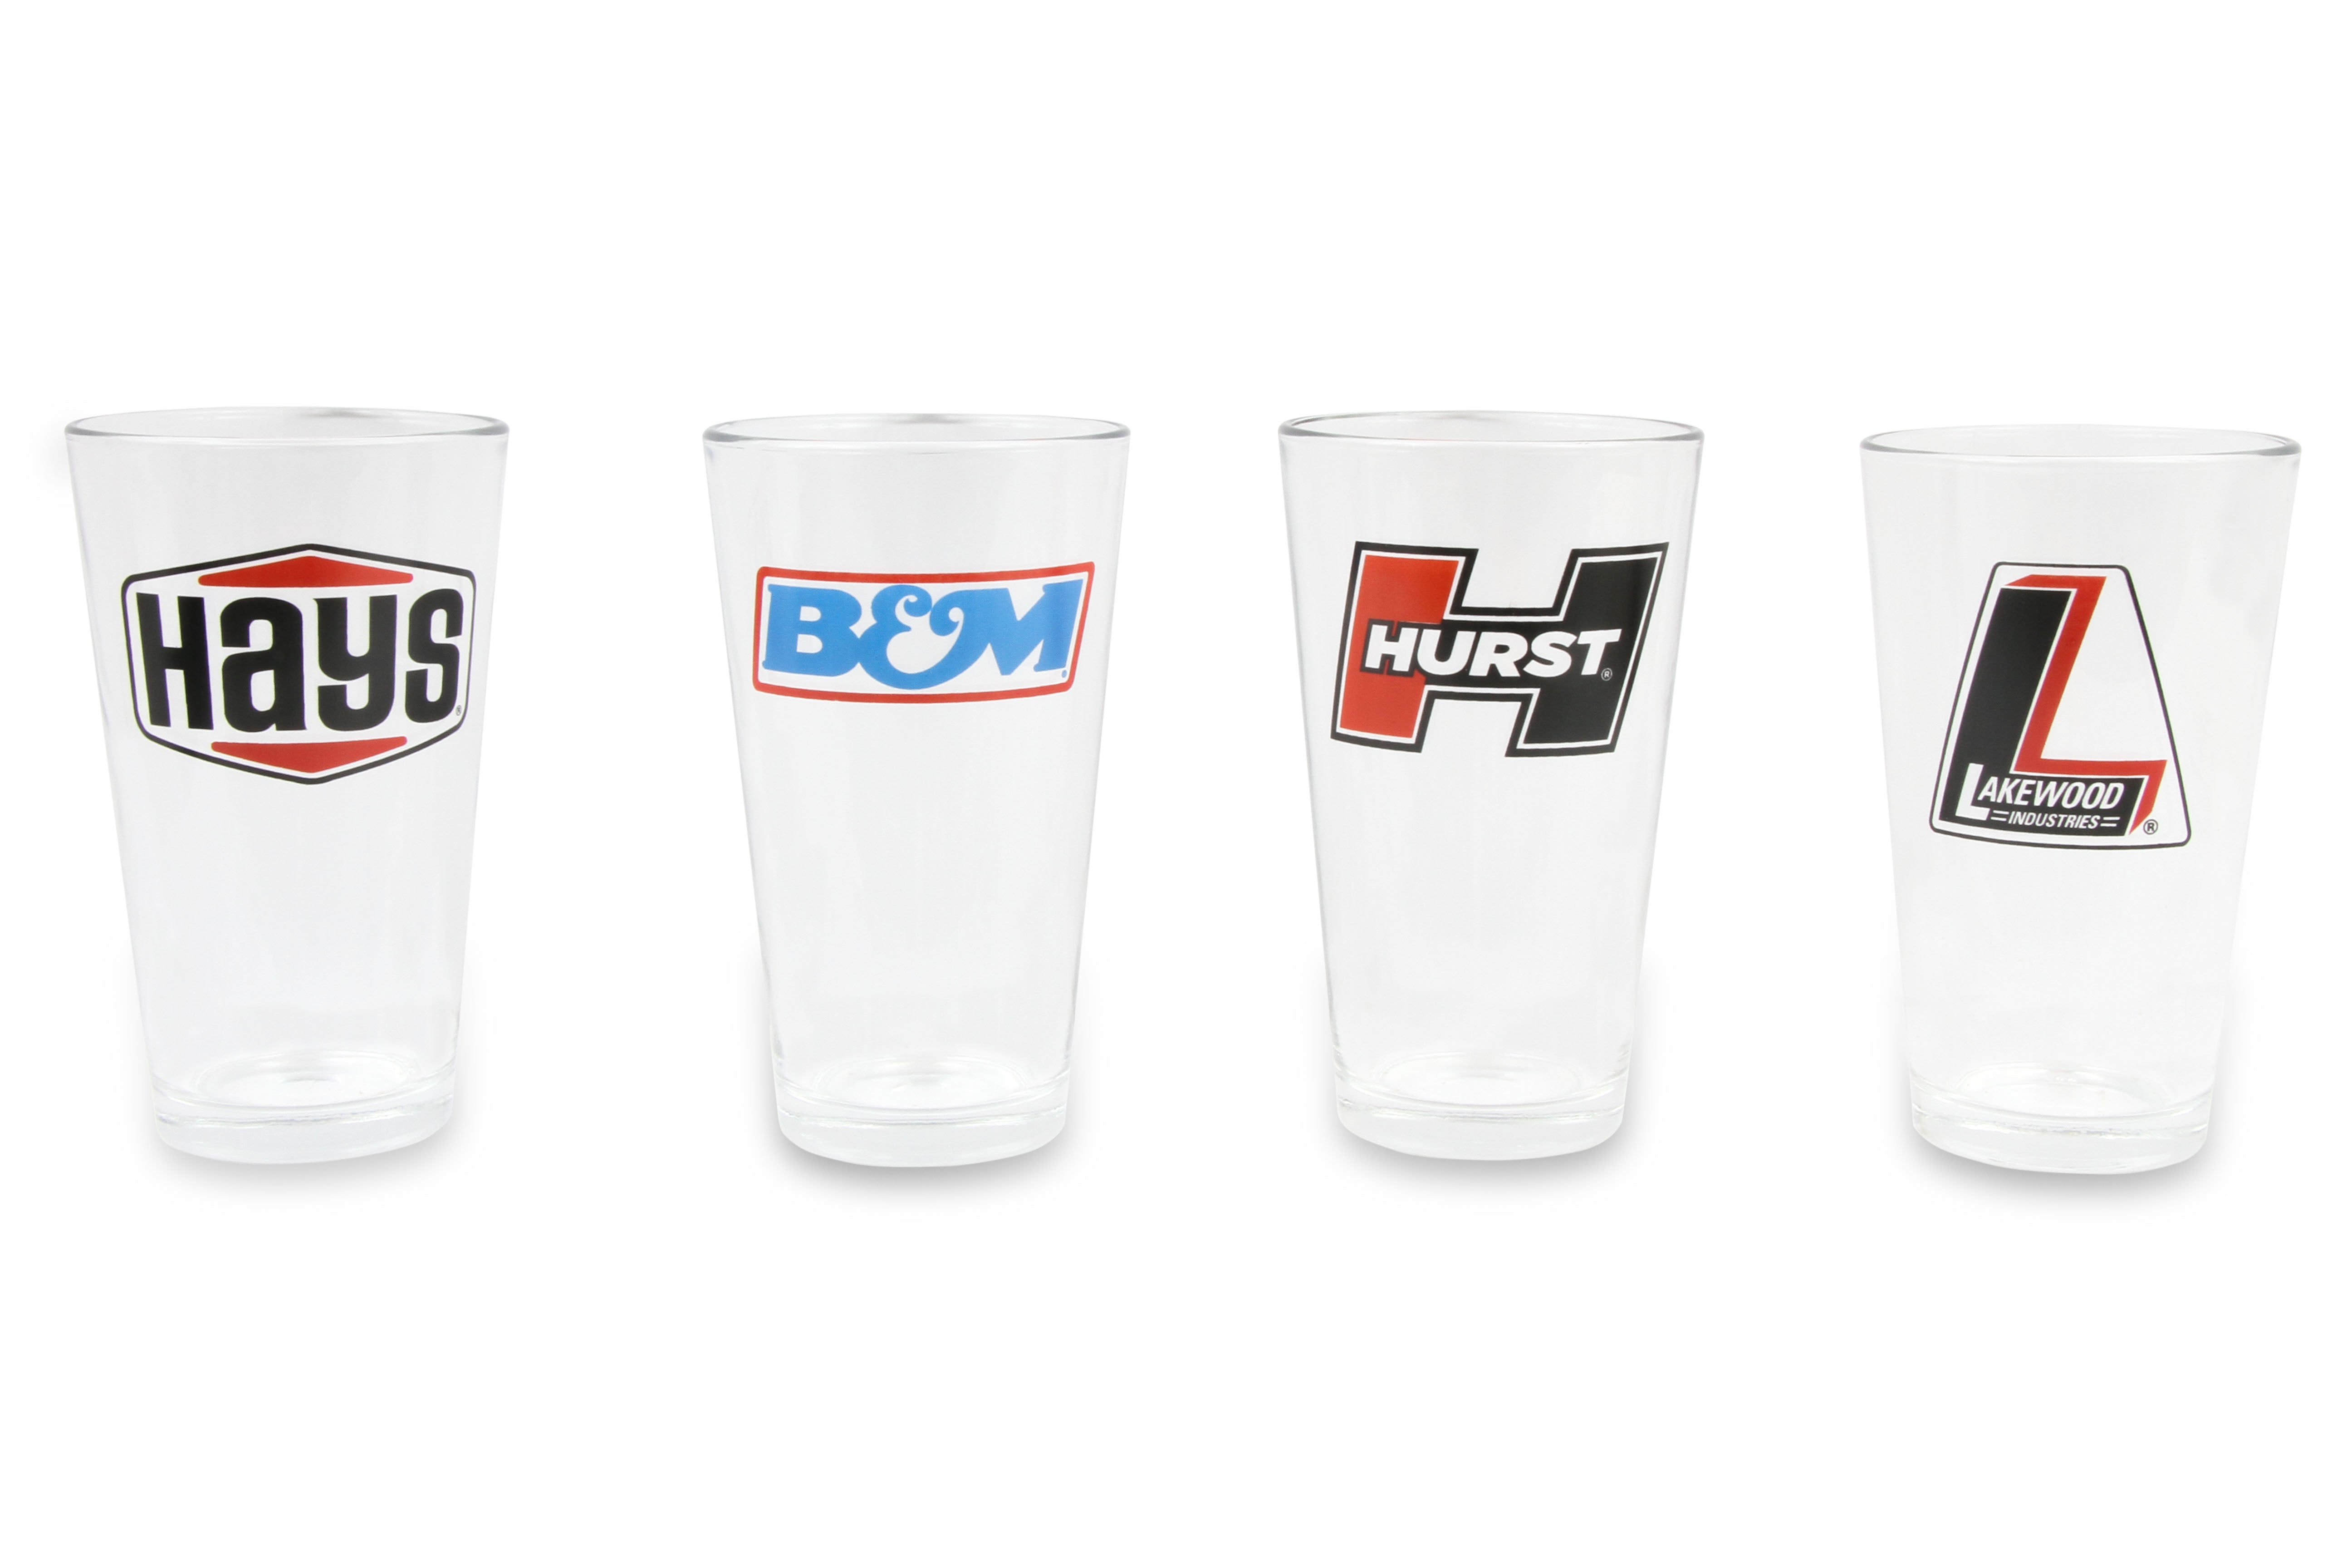 Holley 16oz pub glasses 4-pack assortment of logos including Hays B&M,Hurst and Lakewood